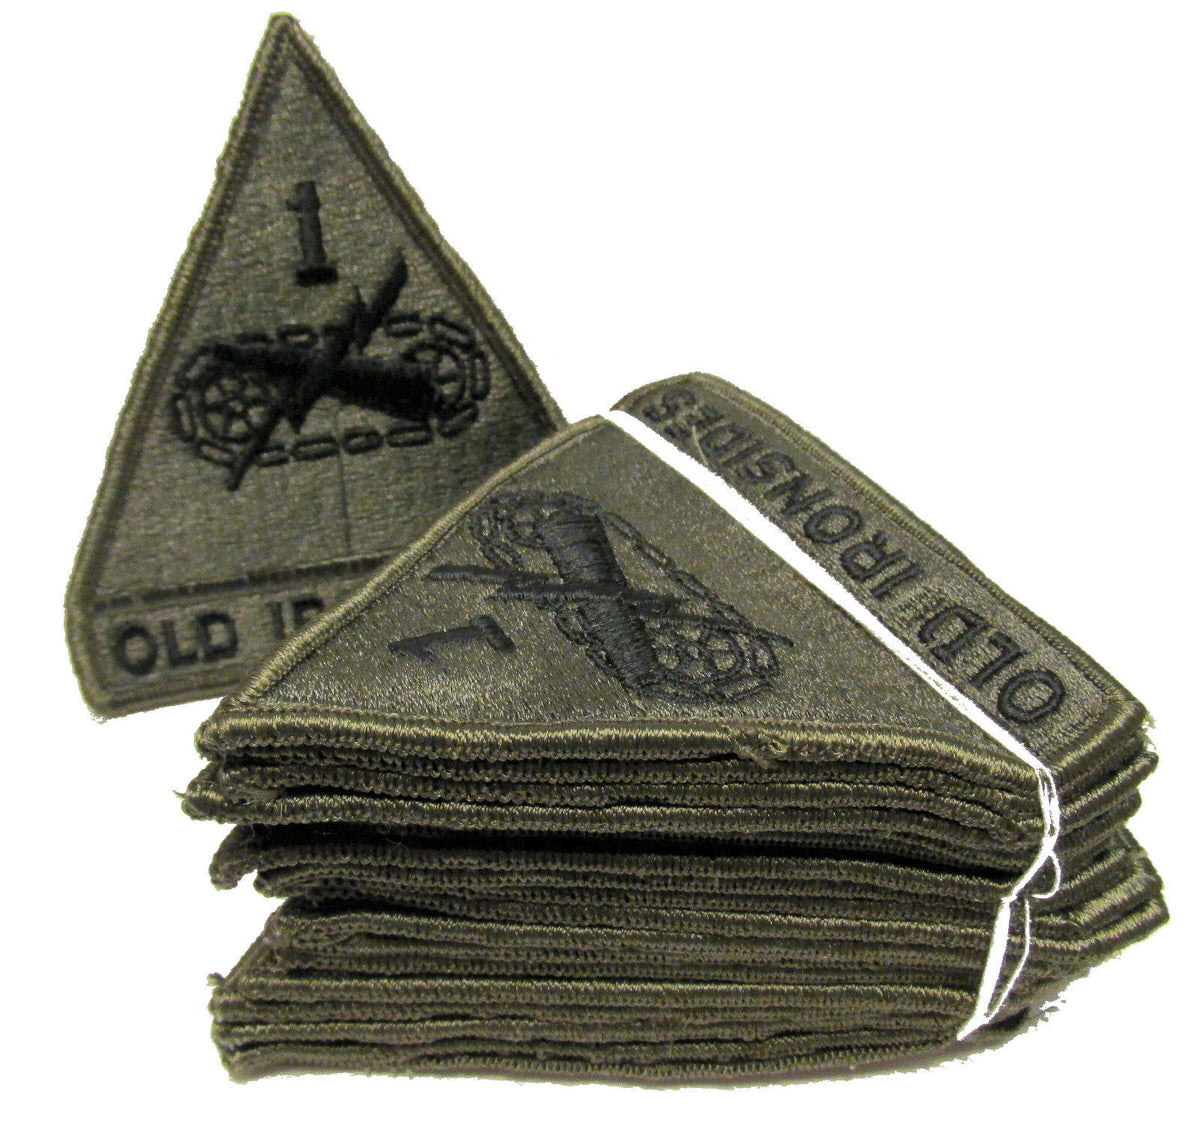 Lot of 10 - Vintage Military Surplus - 1st Armored Division Subdued Patch